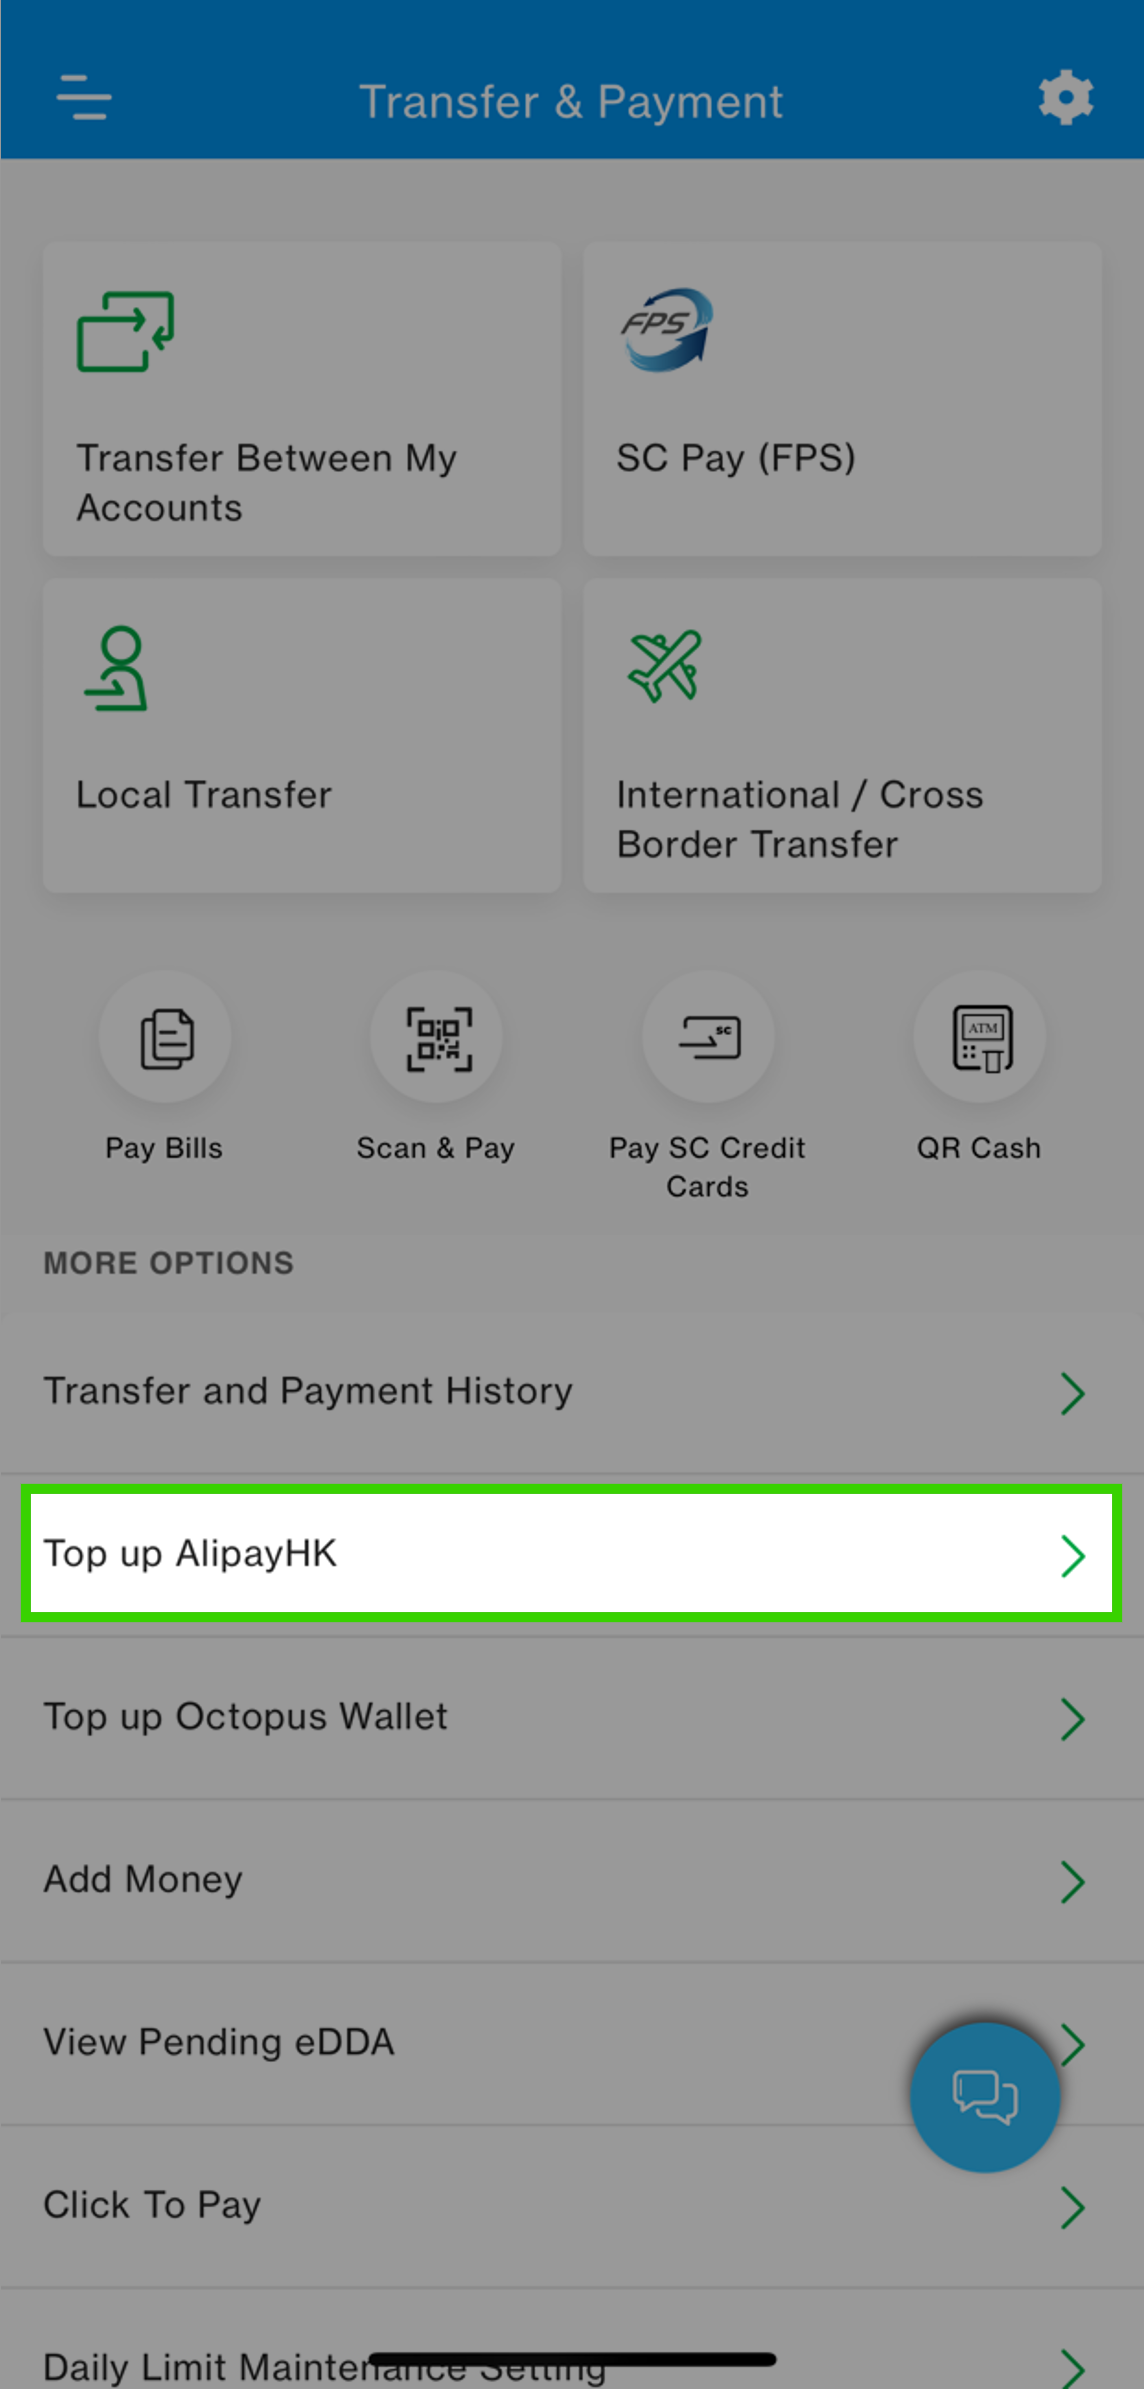 Your AlipayHK Account should first be added on Online Banking before top-up. After login to SC Mobile App, go to ‘Transfer & Payment’ and select ‘Top Up AlipayHK’.